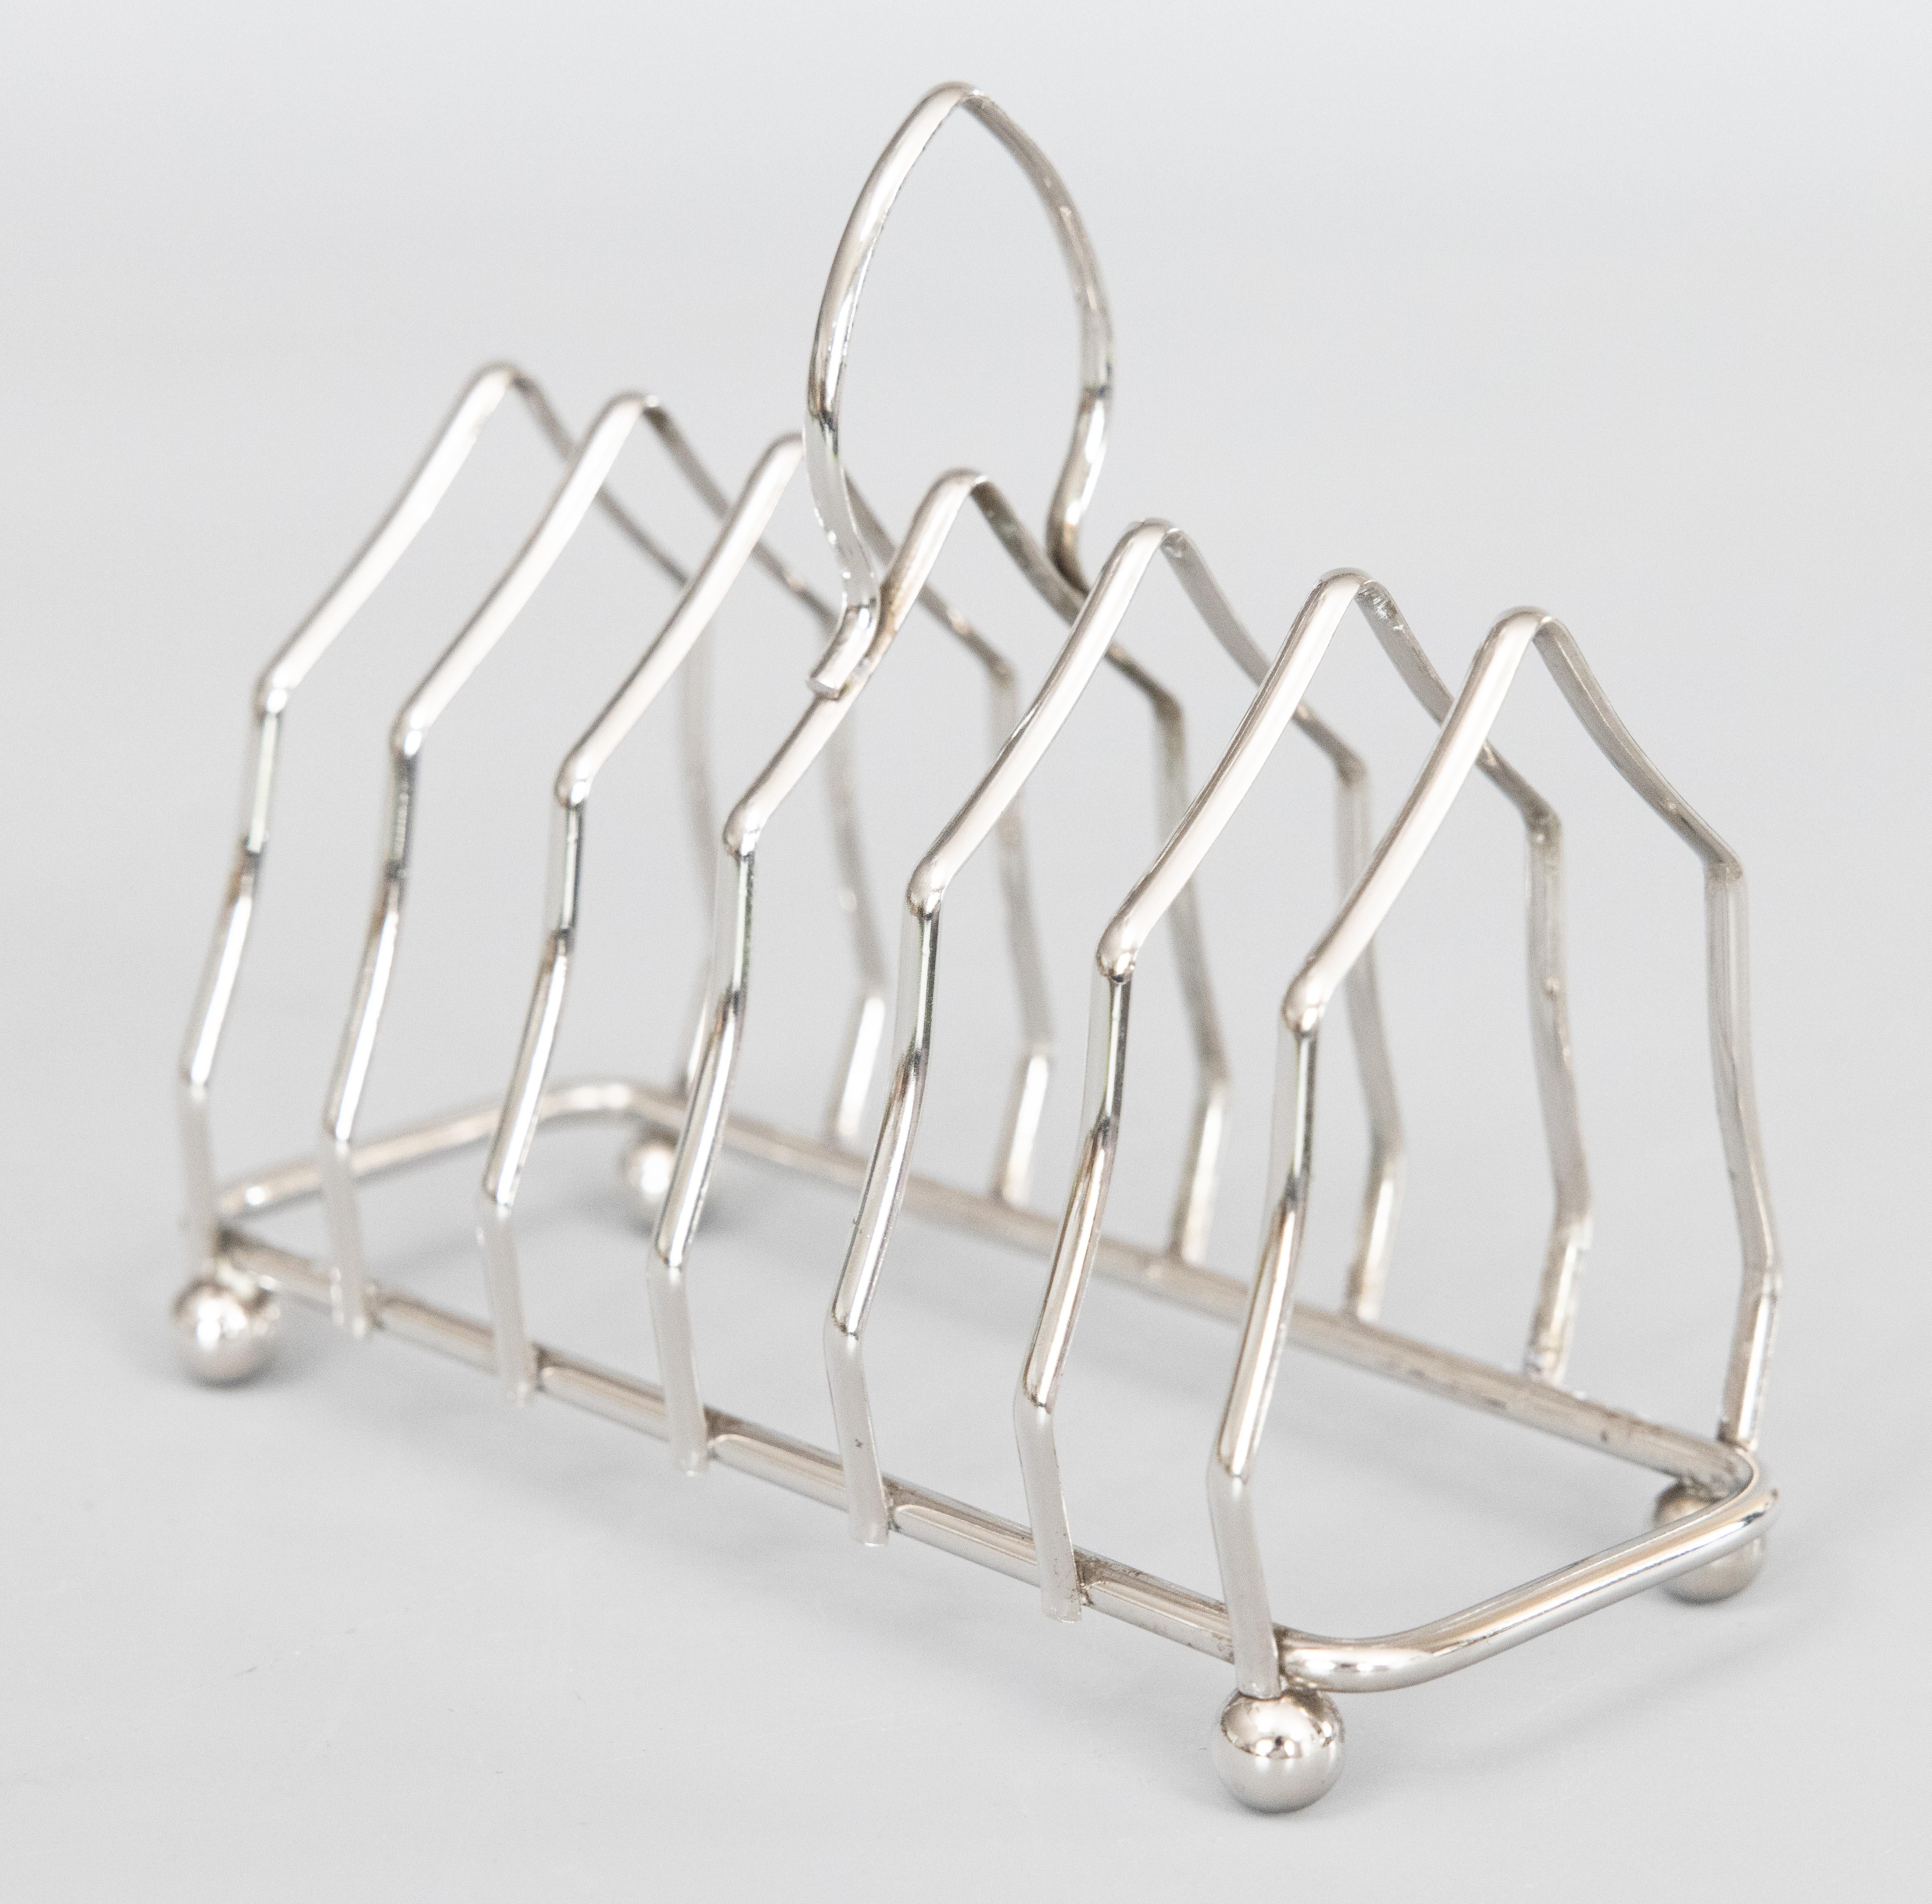 Art Deco Style English Silver Plate Toast Rack Letter Holder, circa 1950 For Sale 4